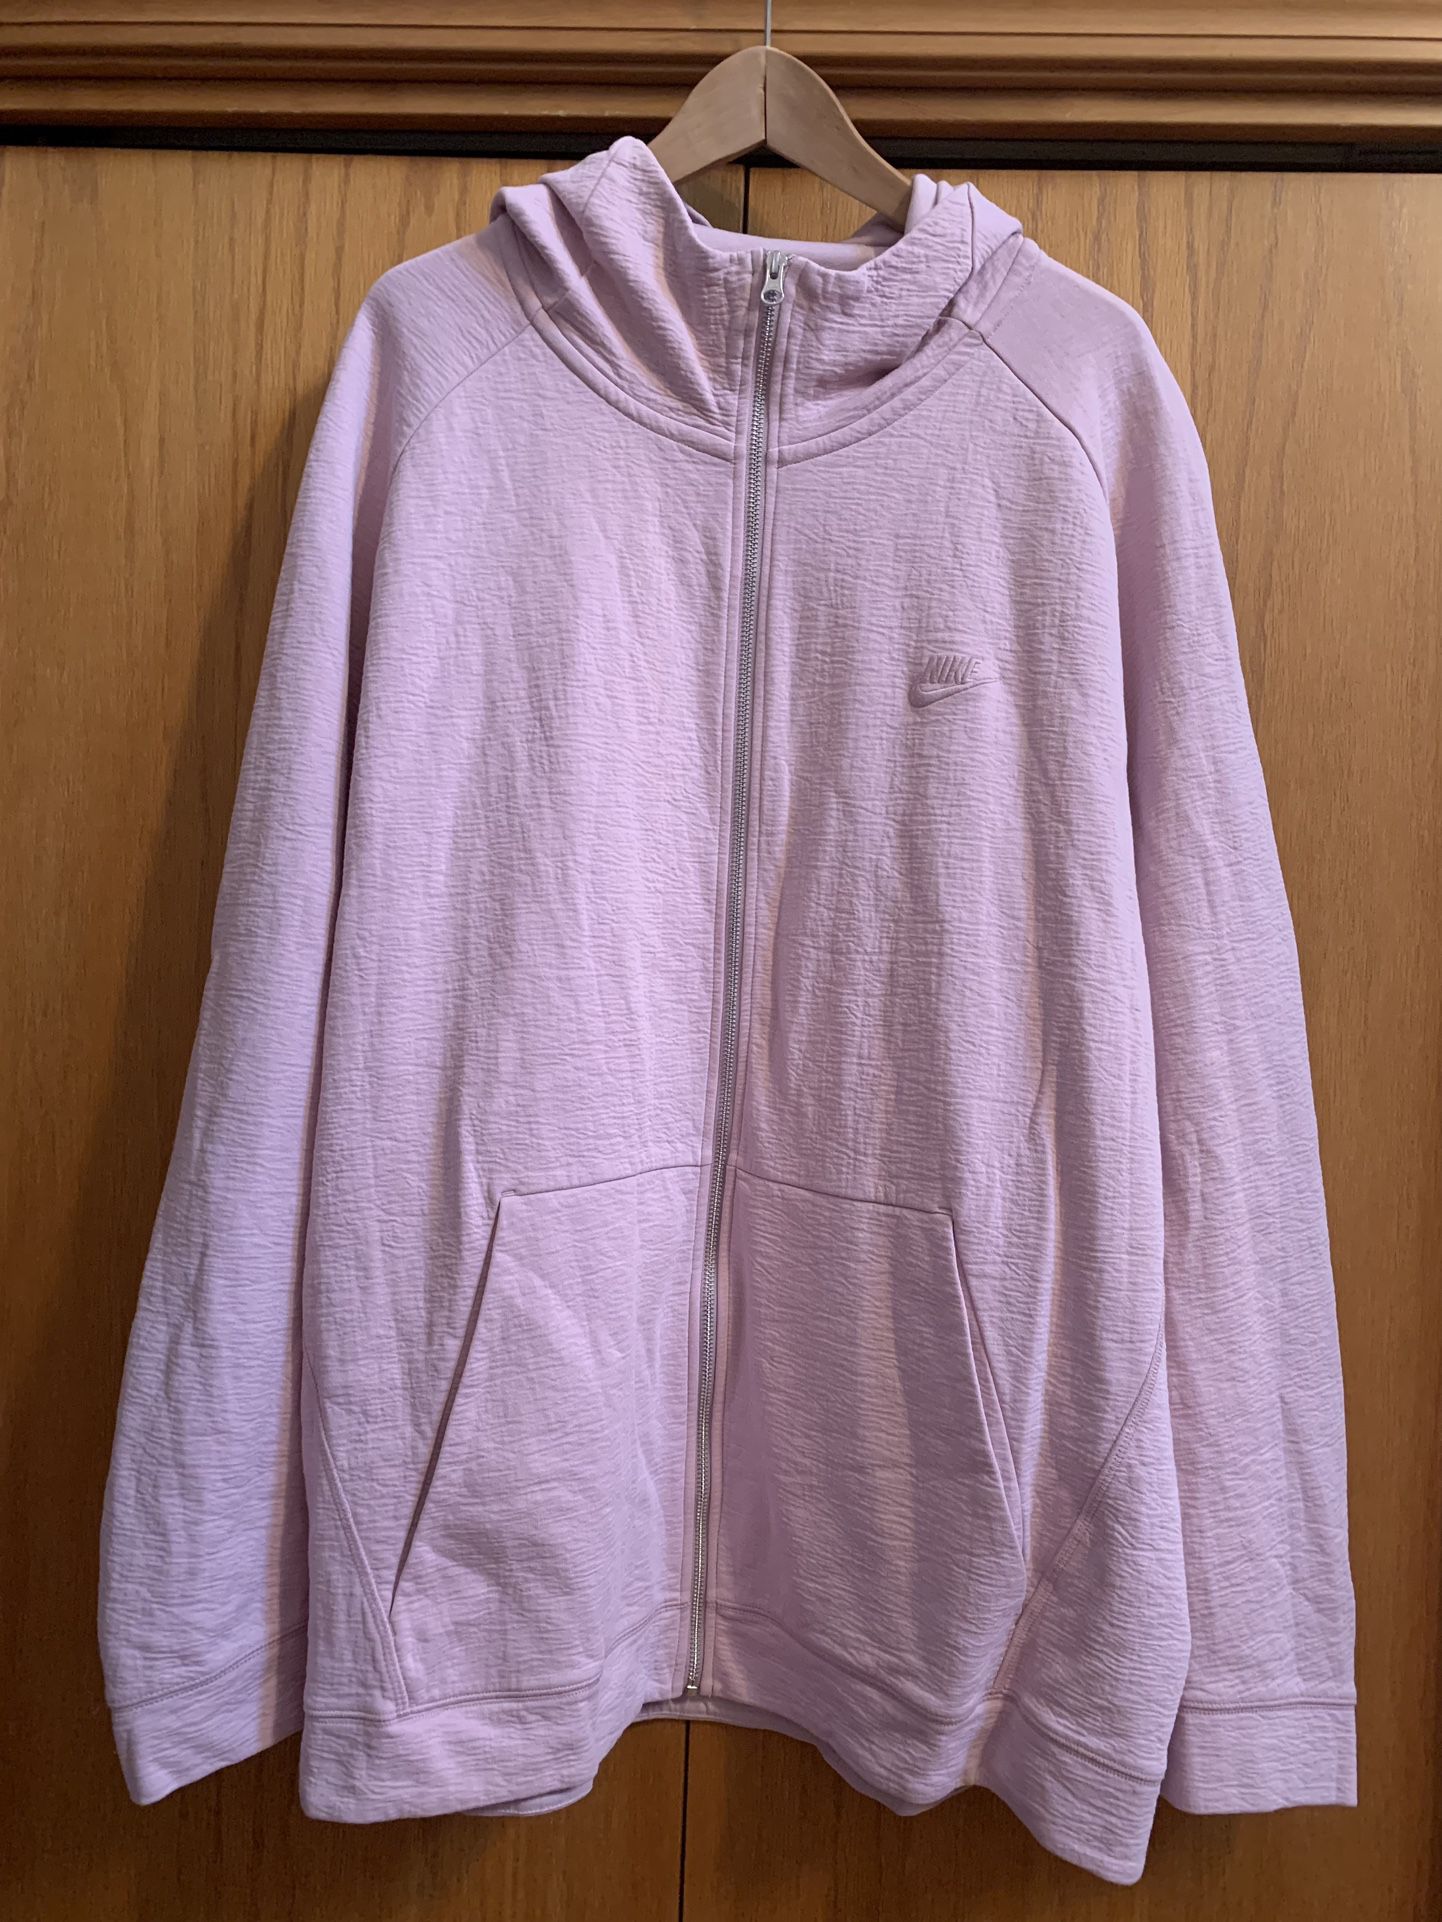 Nike Mens Hoodie XXLT Mauve Pink Zippered with Crinkled Texture, Like New